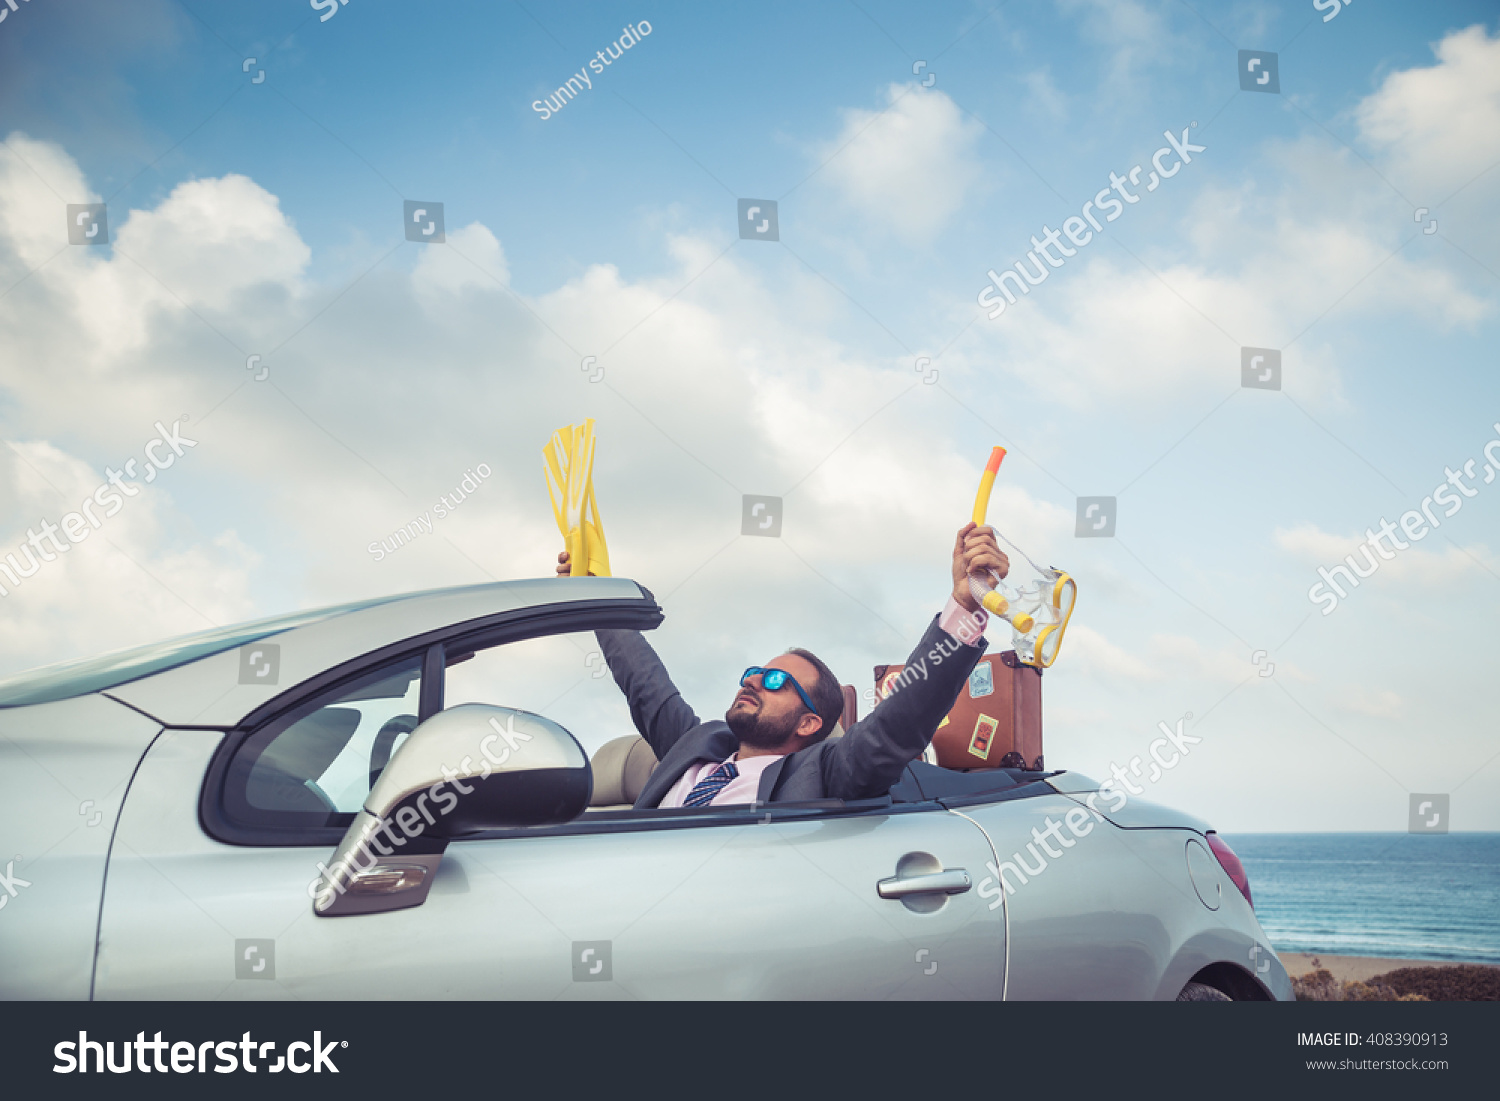 Successful young businessman on a beach. Man sitting in the cabriolet classic car. Summer vacations and travel concept #408390913